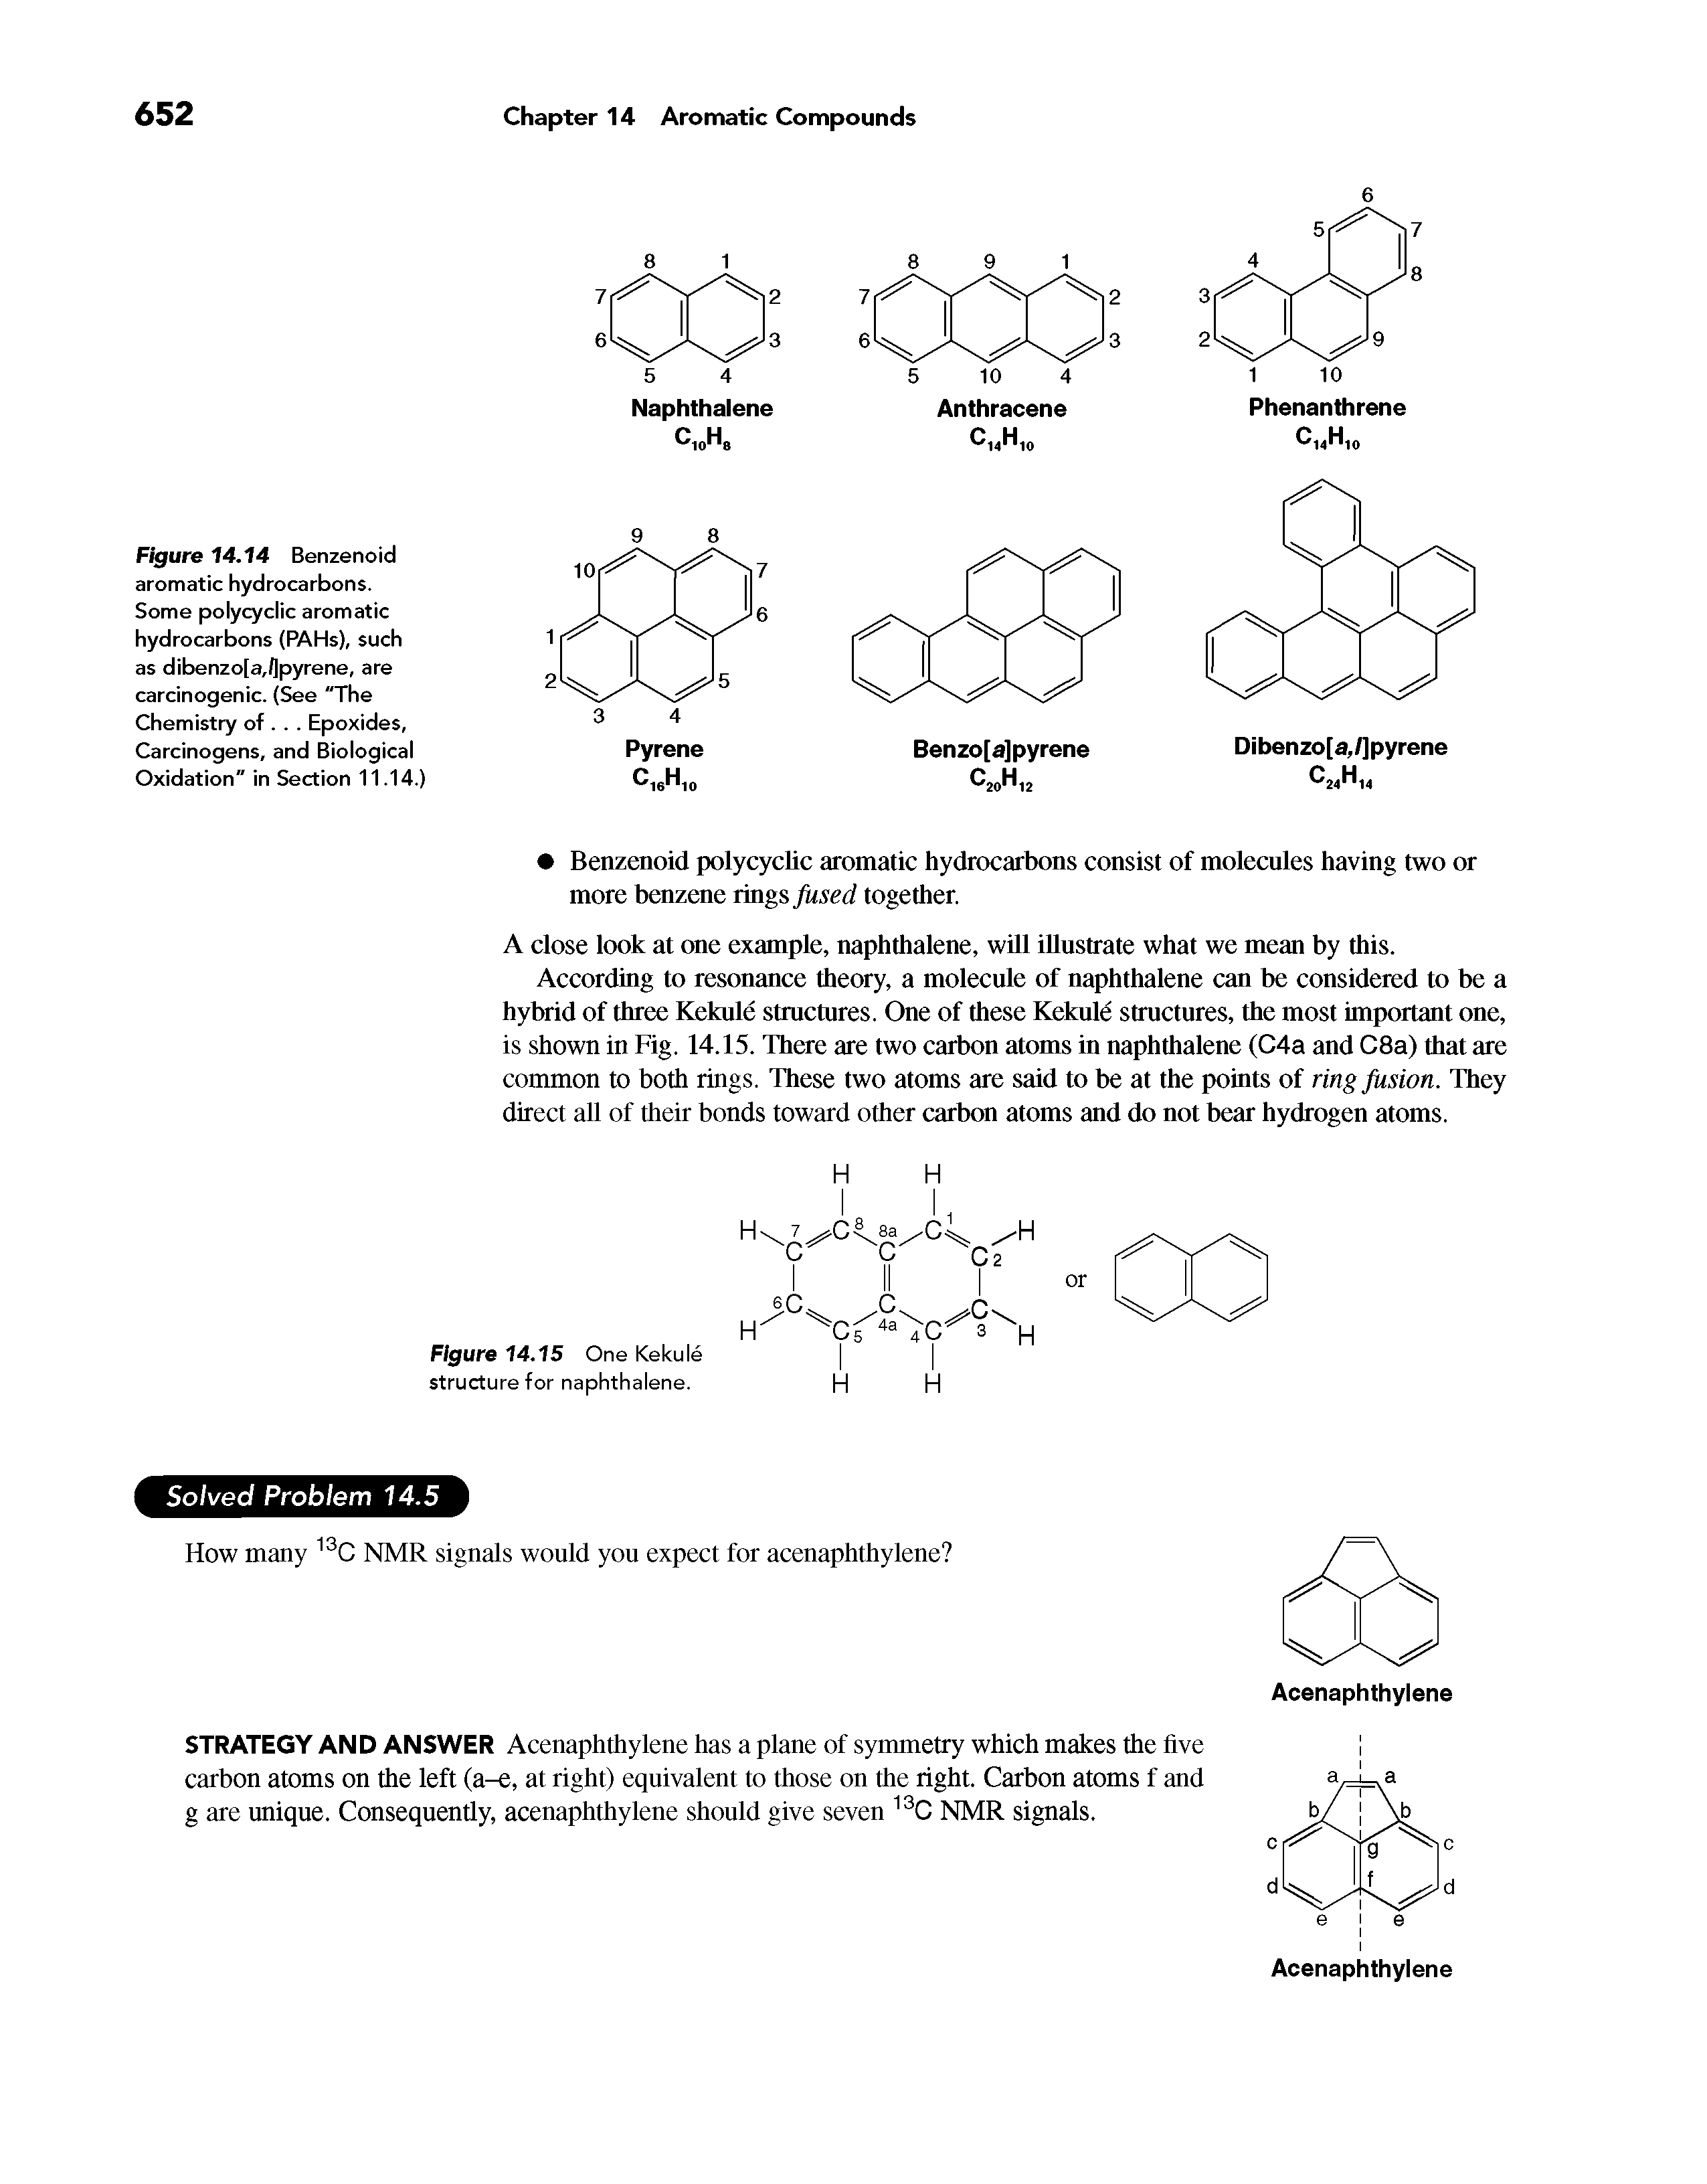 Figure 14.14 Benzenoid aromatic hydrocarbons. Some polycyclic aromatic hydrocarbons (PAHs), such as dibenzo[a,Qpyrene, are carcinogenic. (See "The Chemistry of. . . Epoxides, Carcinogens, and Biological Oxidation" in Section 11.14.)...